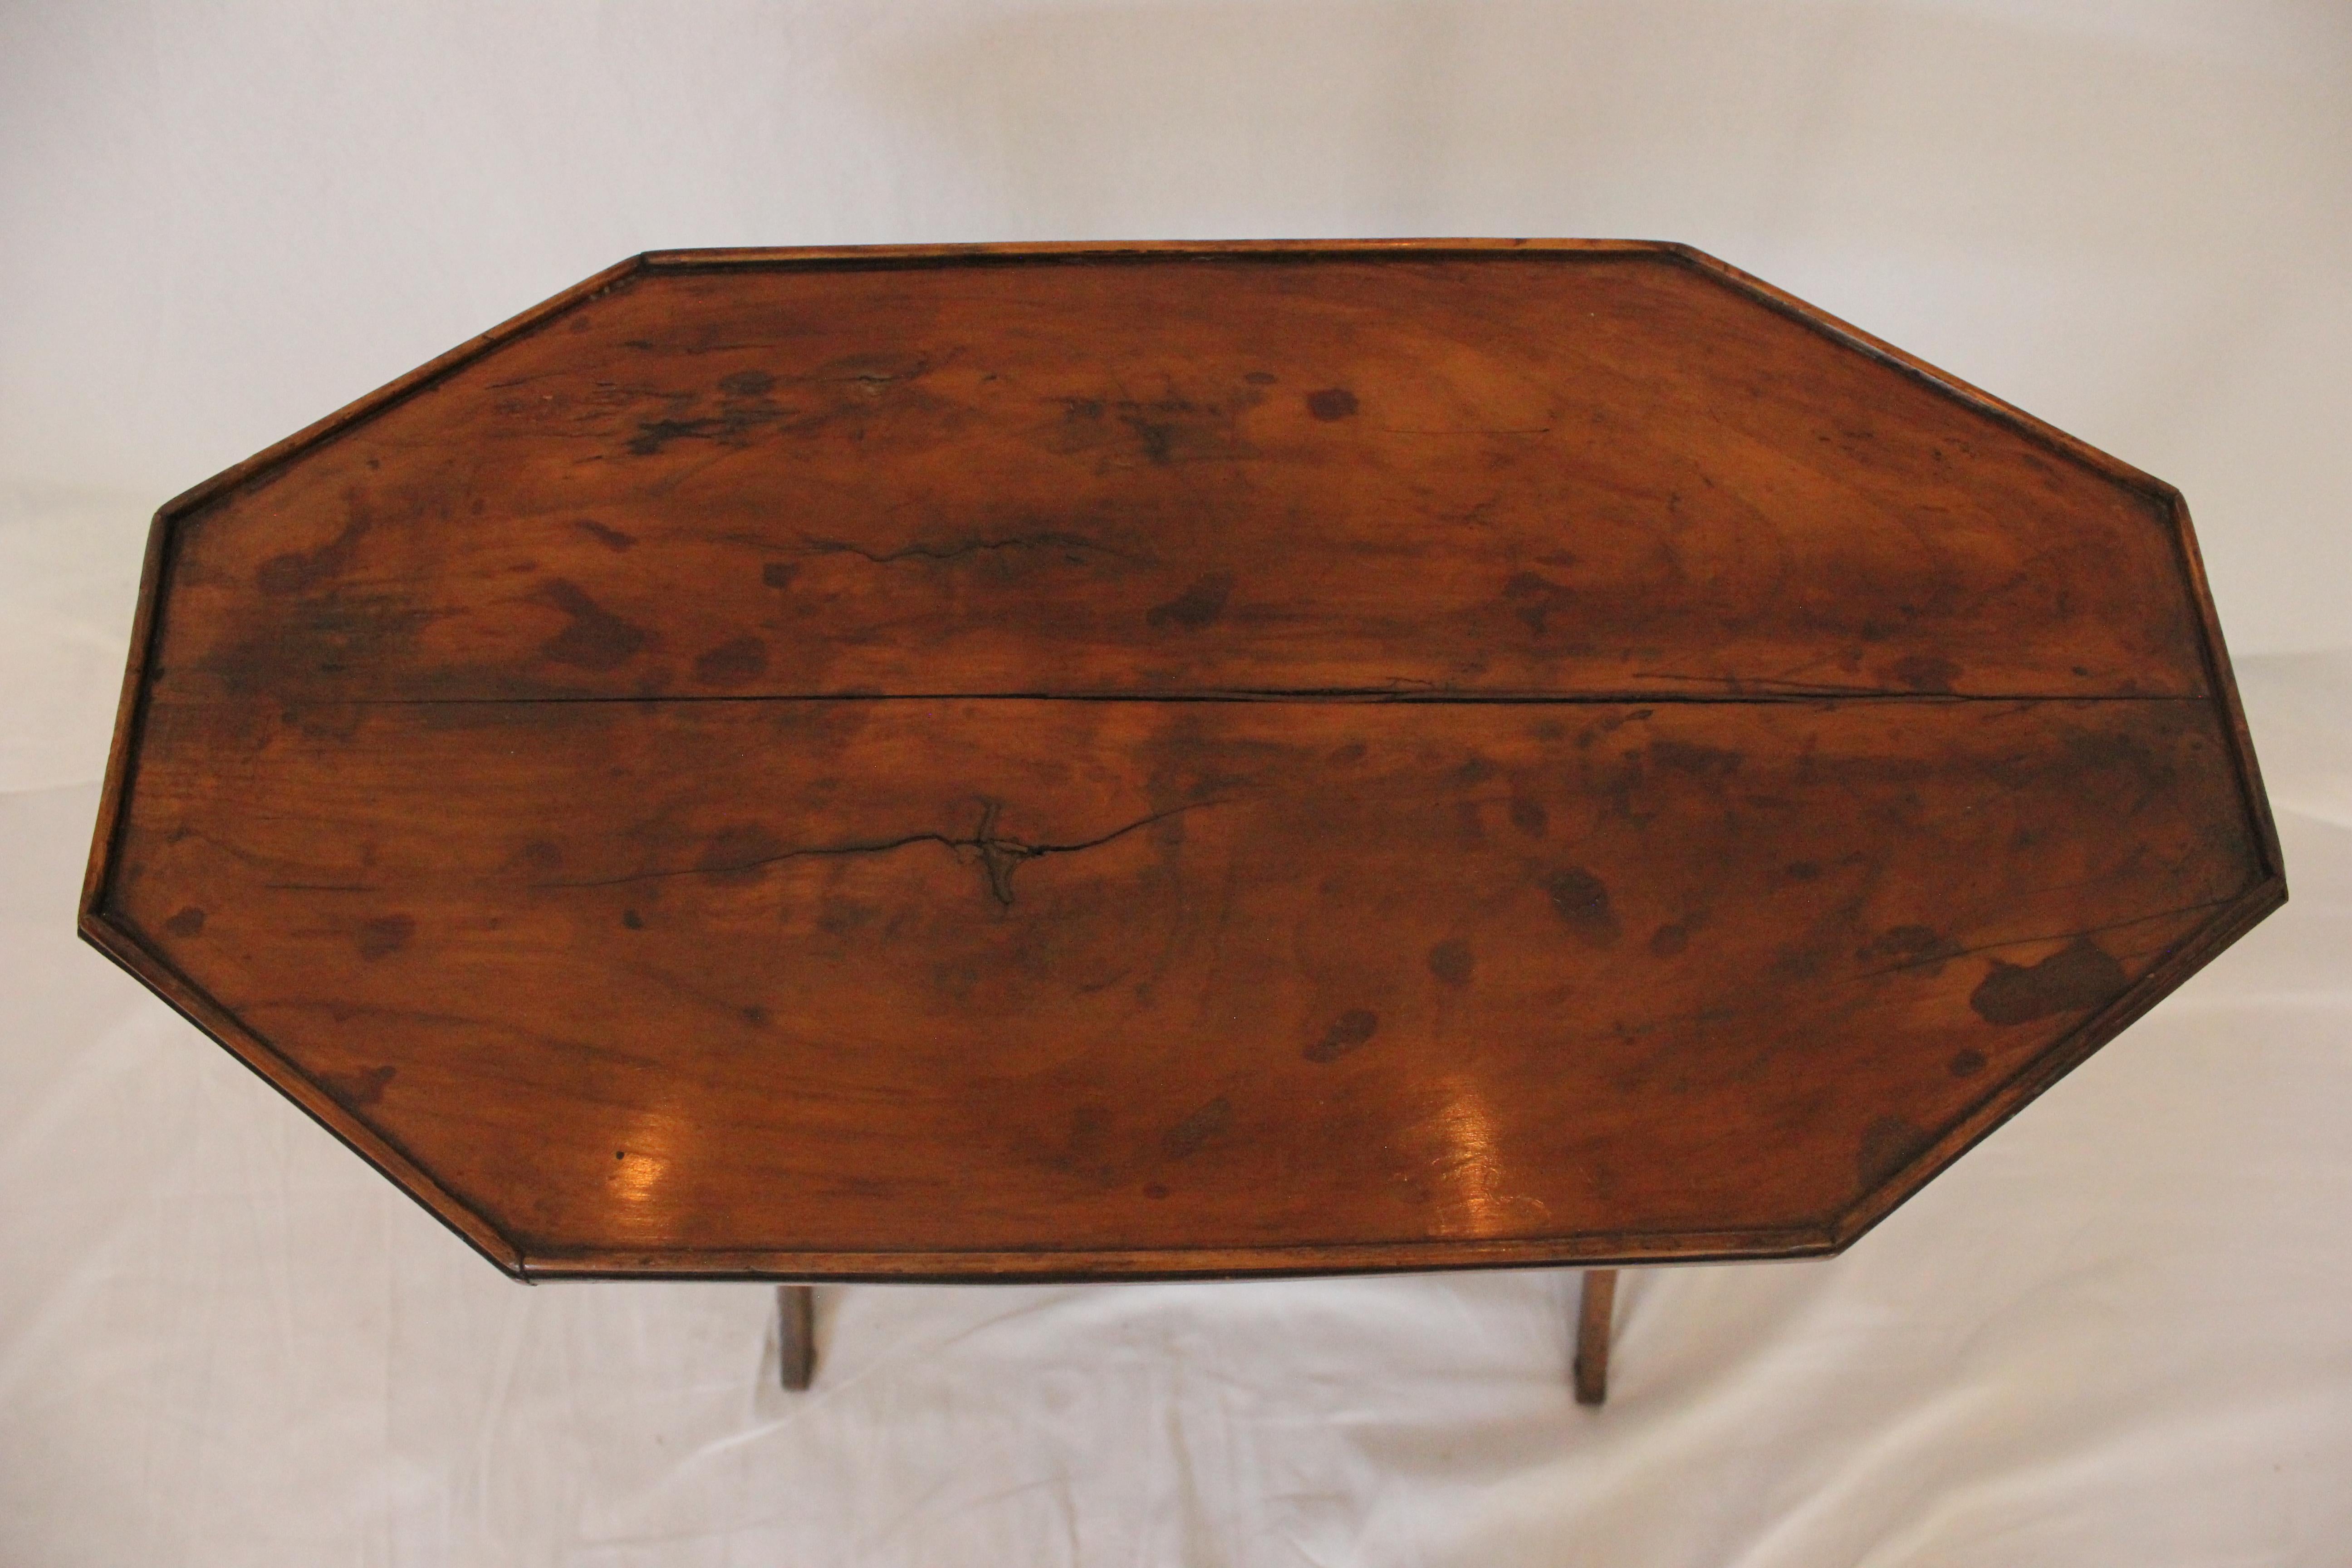 Hand-Crafted Antique French Provincial Fruitwood Side Table / Display Stand Late 18th C For Sale